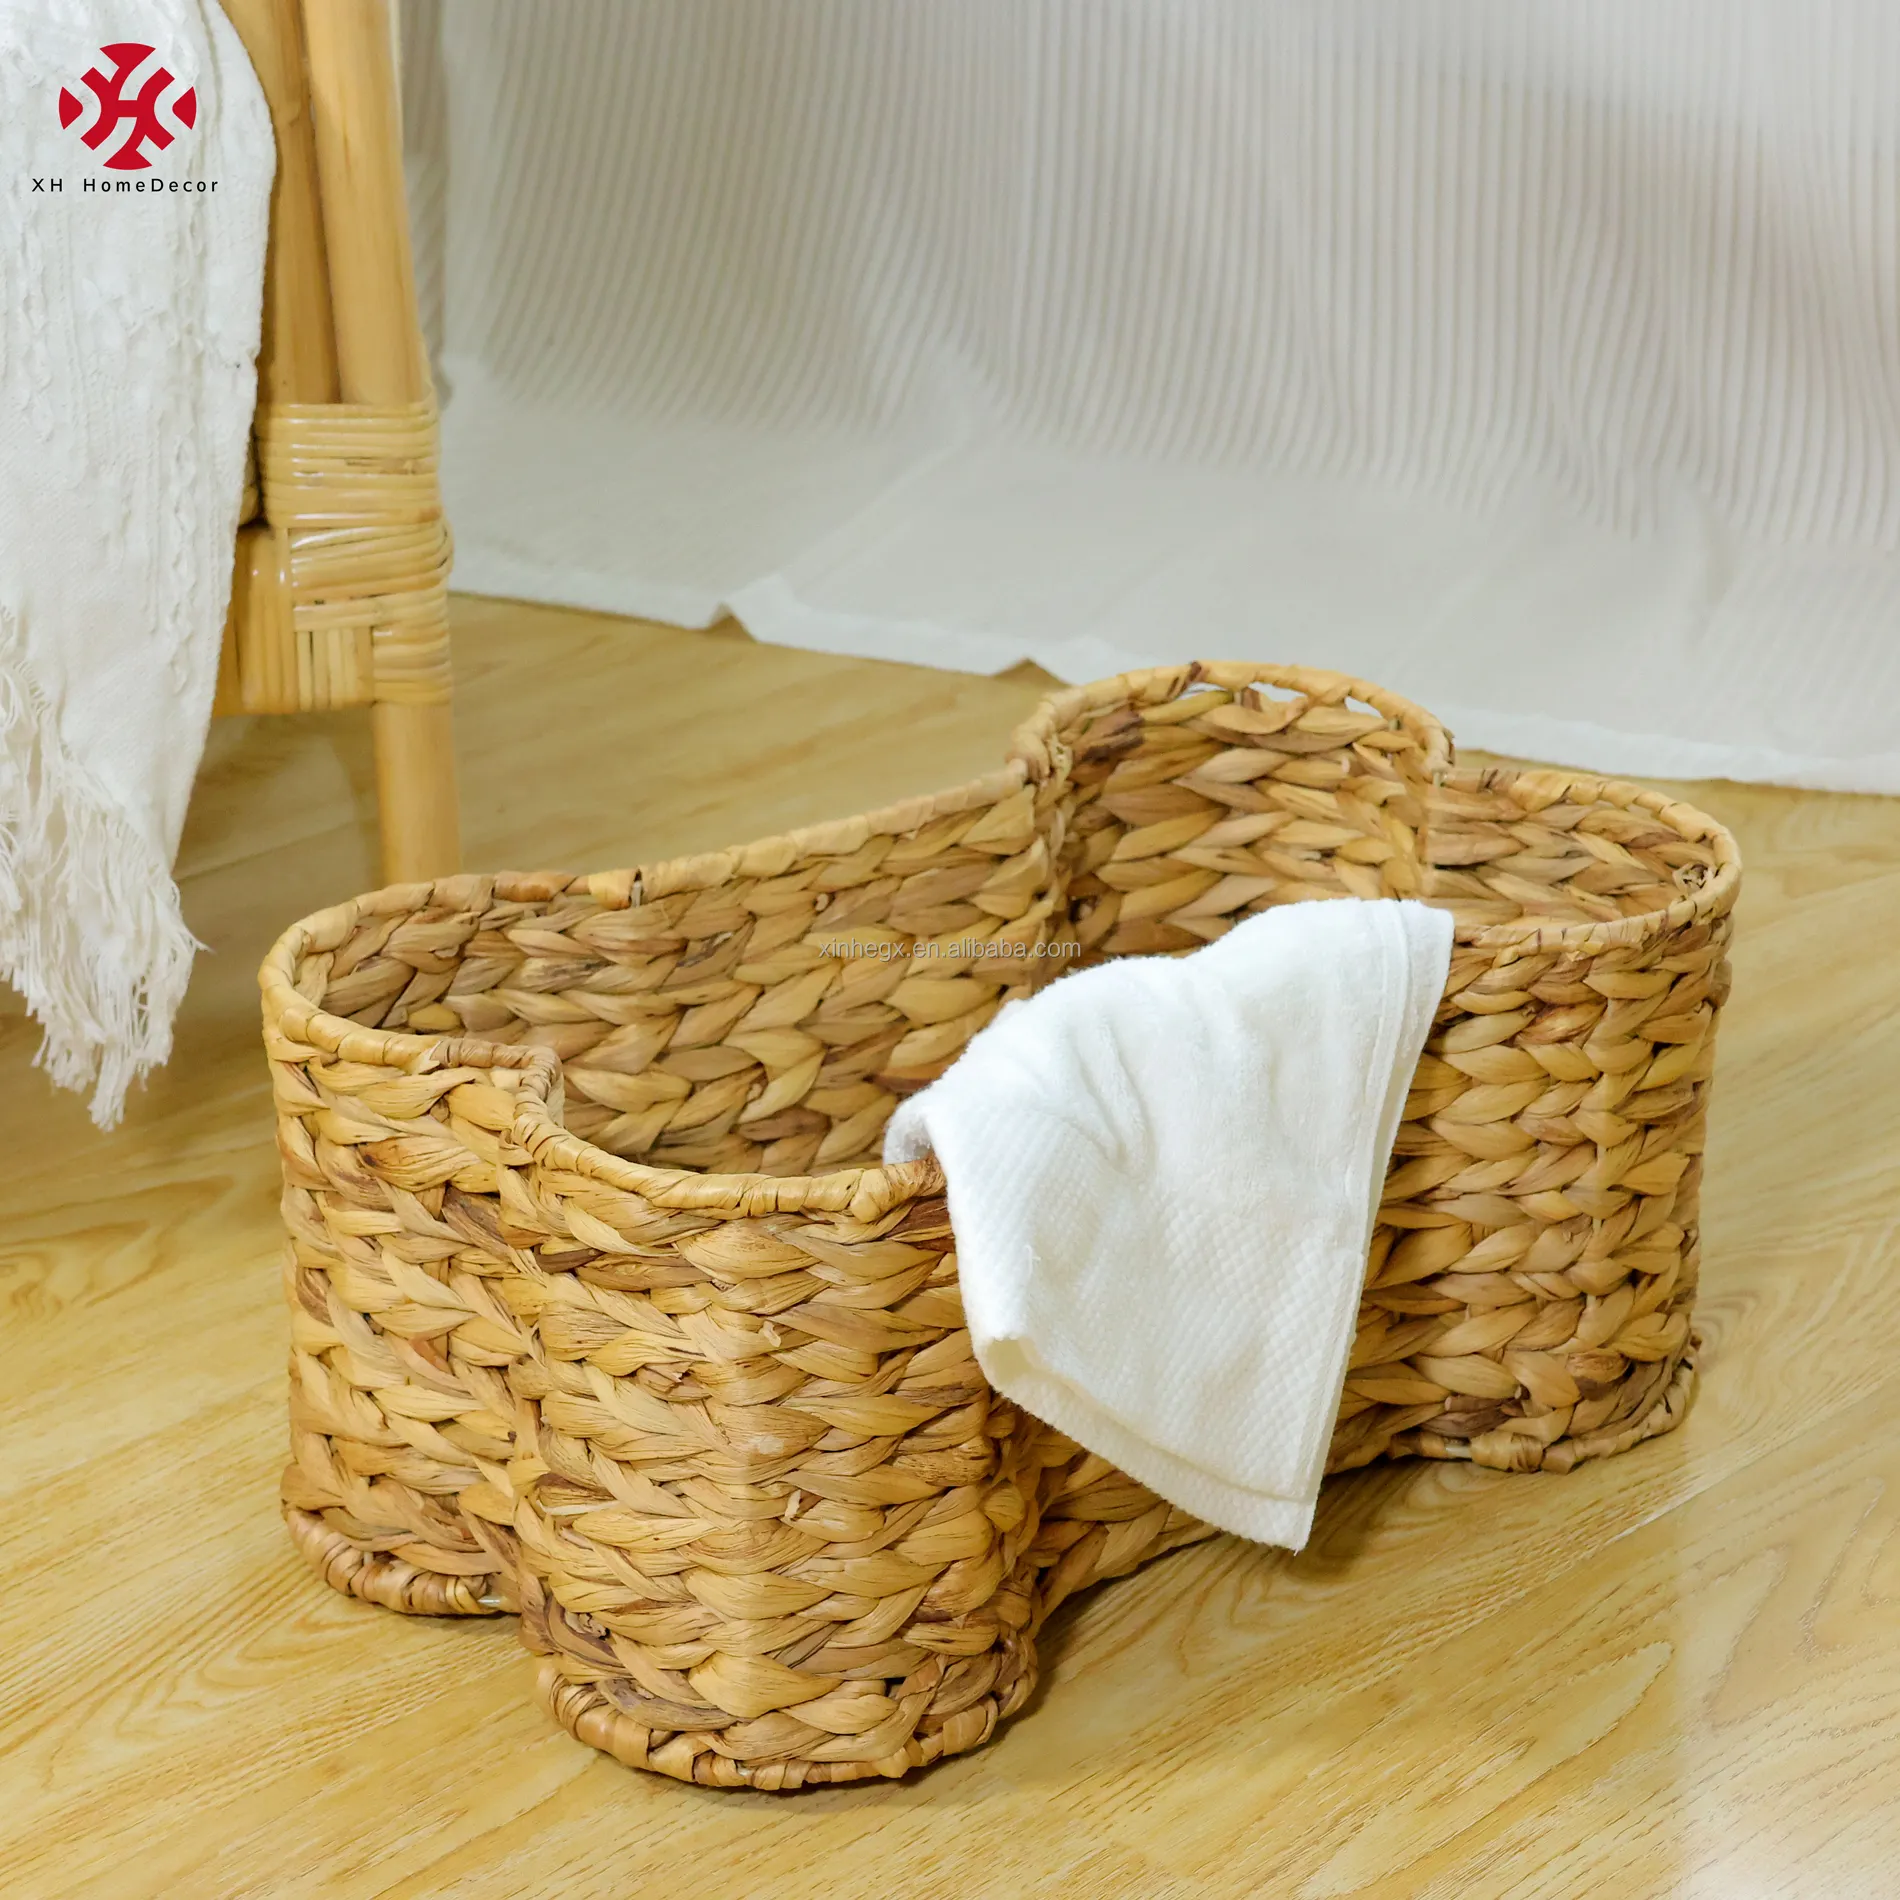 XH Boneshape Eco-friendly Natural Water Hyacinth Seagrass Handwoven Storage Collection basket